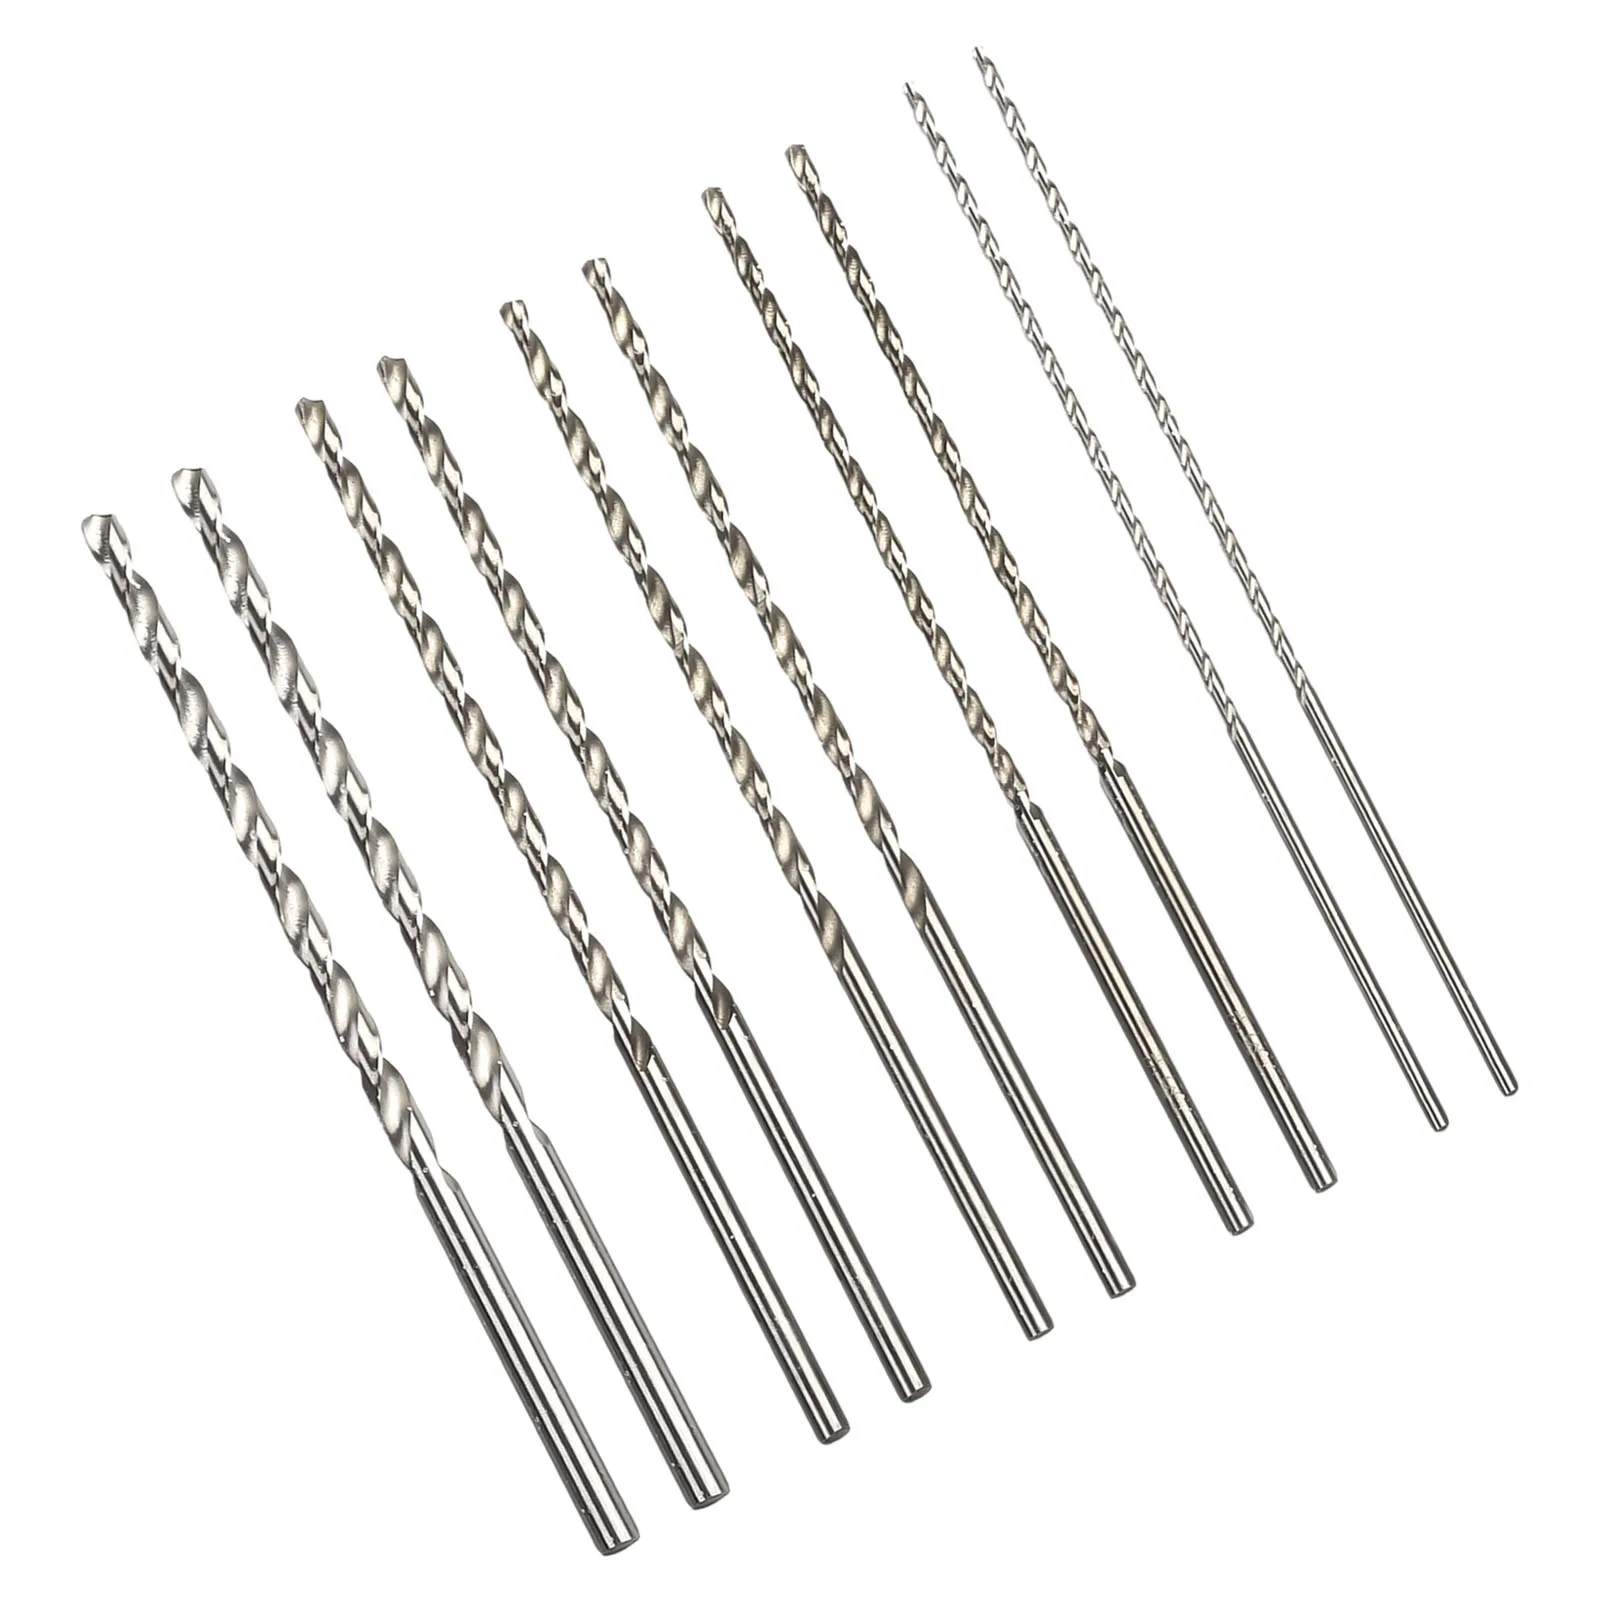 Electric Drill Drill Bit Power Tools Drilling Machines Accessories 4mm 5mm High Speed Steel Parts Silver 10PCS